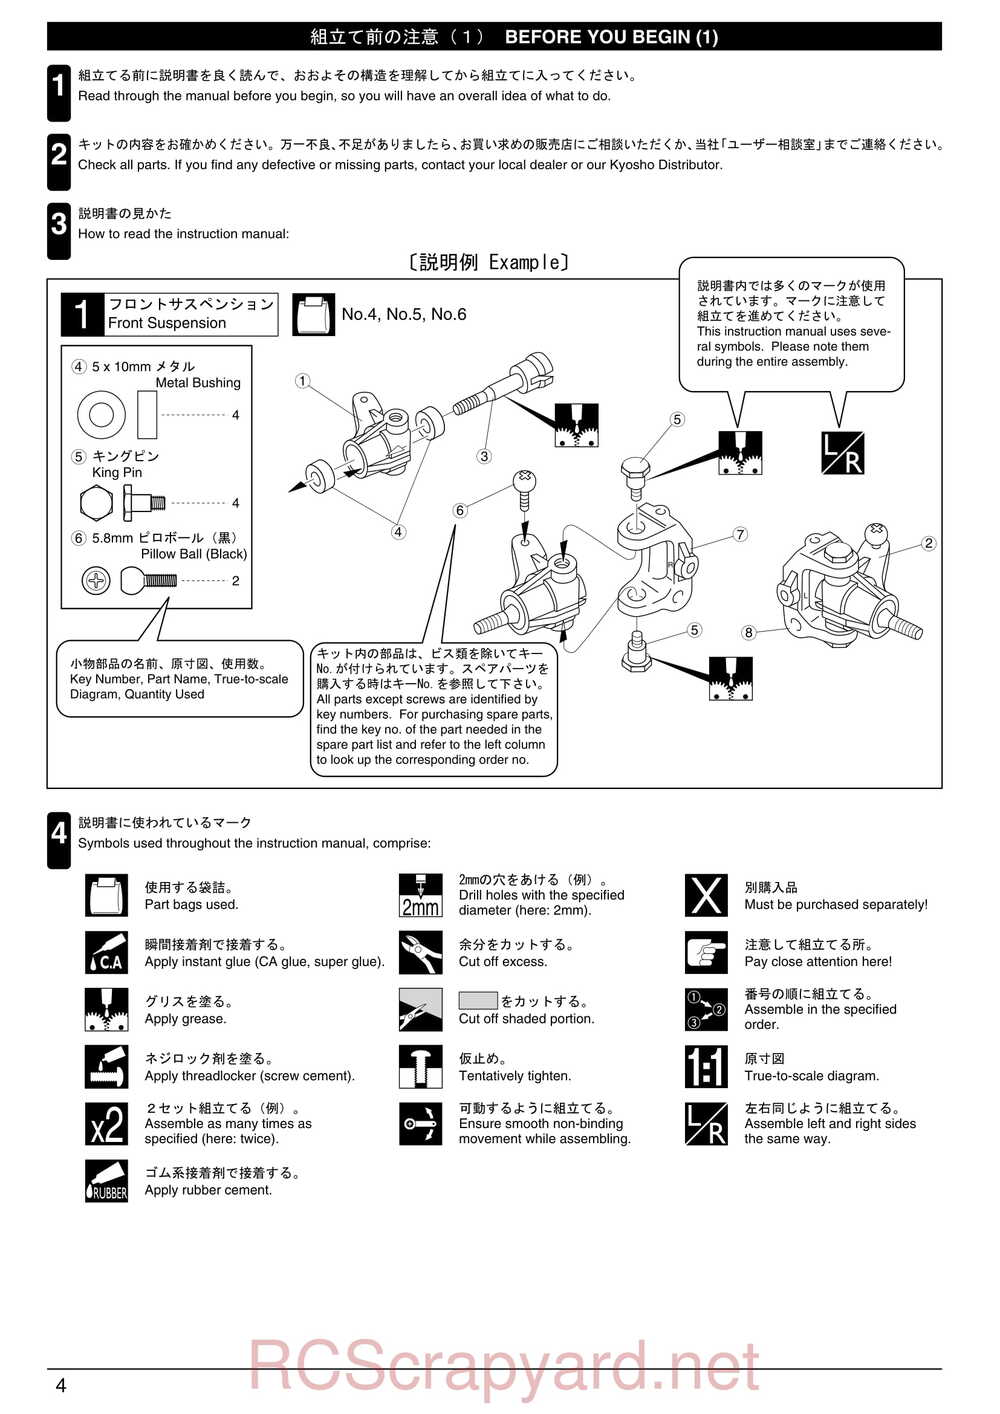 Kyosho - 30522b - Twin-Forcec-SP - Manual - Page 04